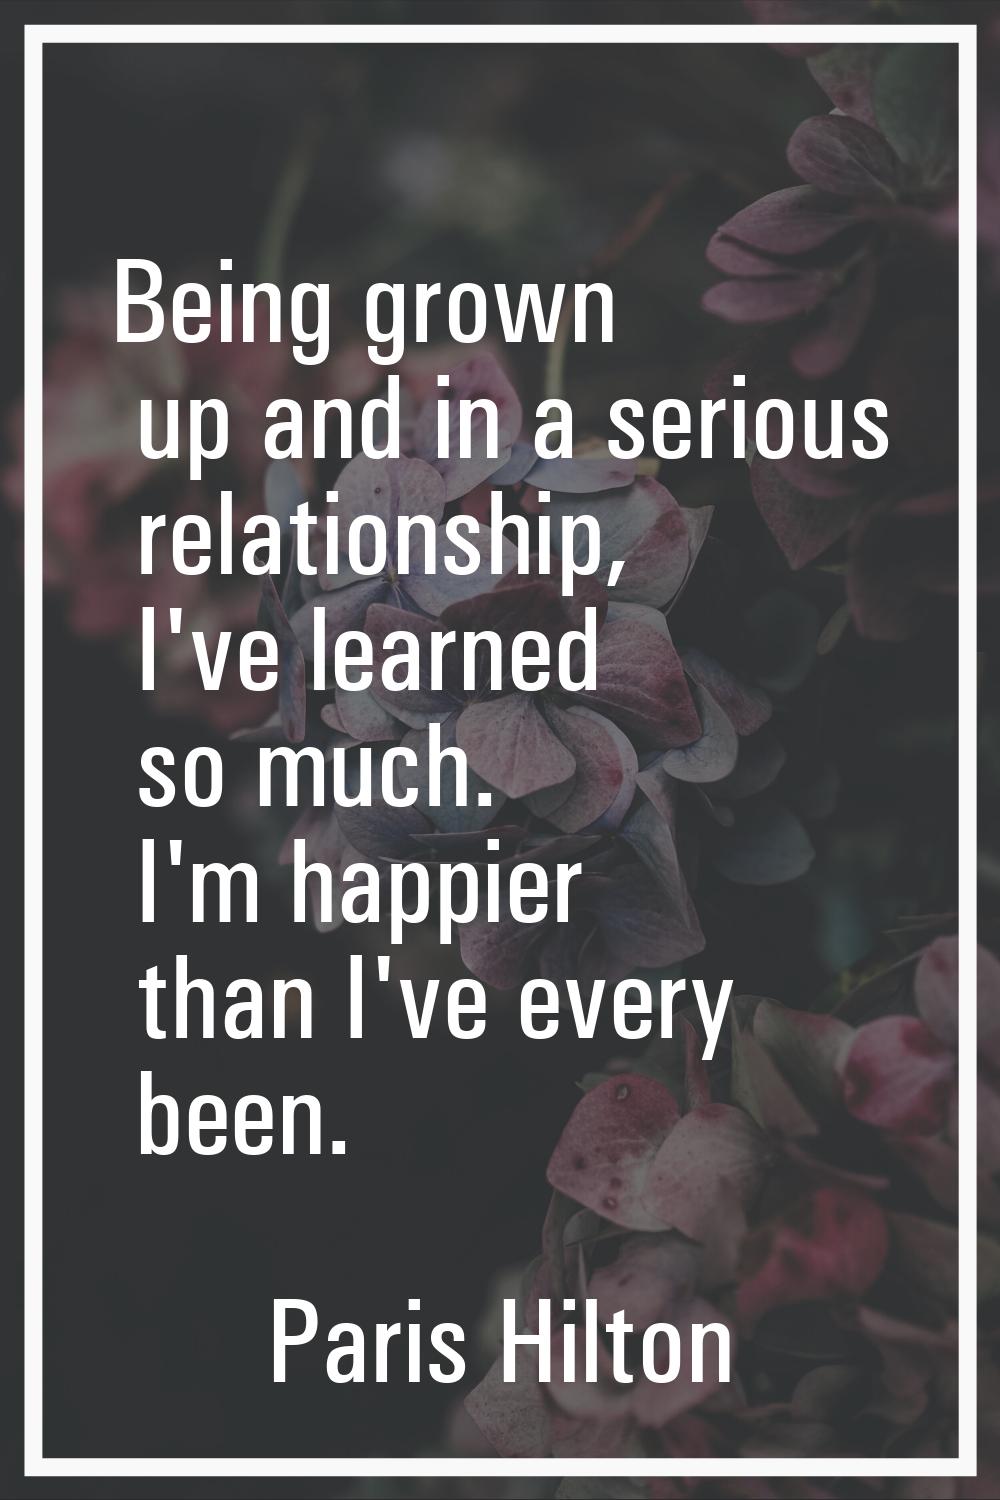 Being grown up and in a serious relationship, I've learned so much. I'm happier than I've every bee